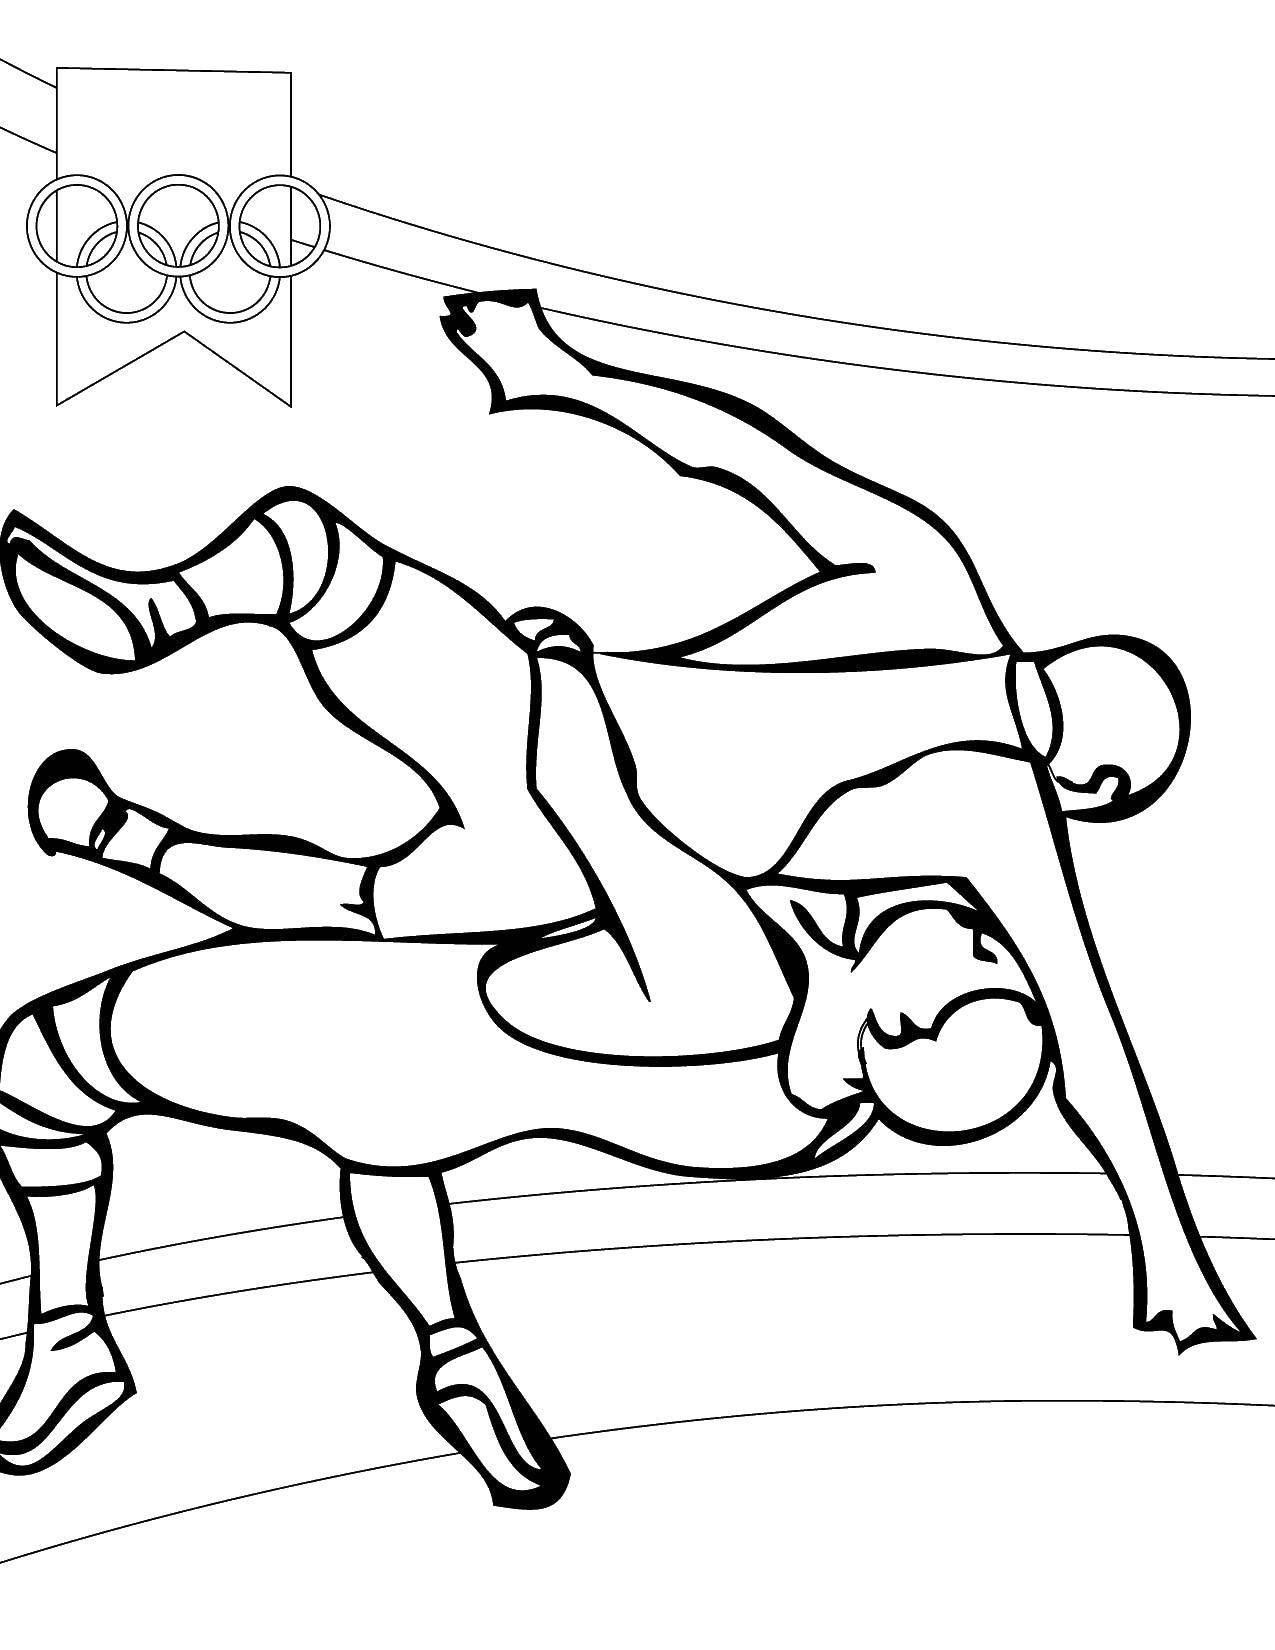 Coloring Burma. Category sports. Tags:  sports, games, wrestling.